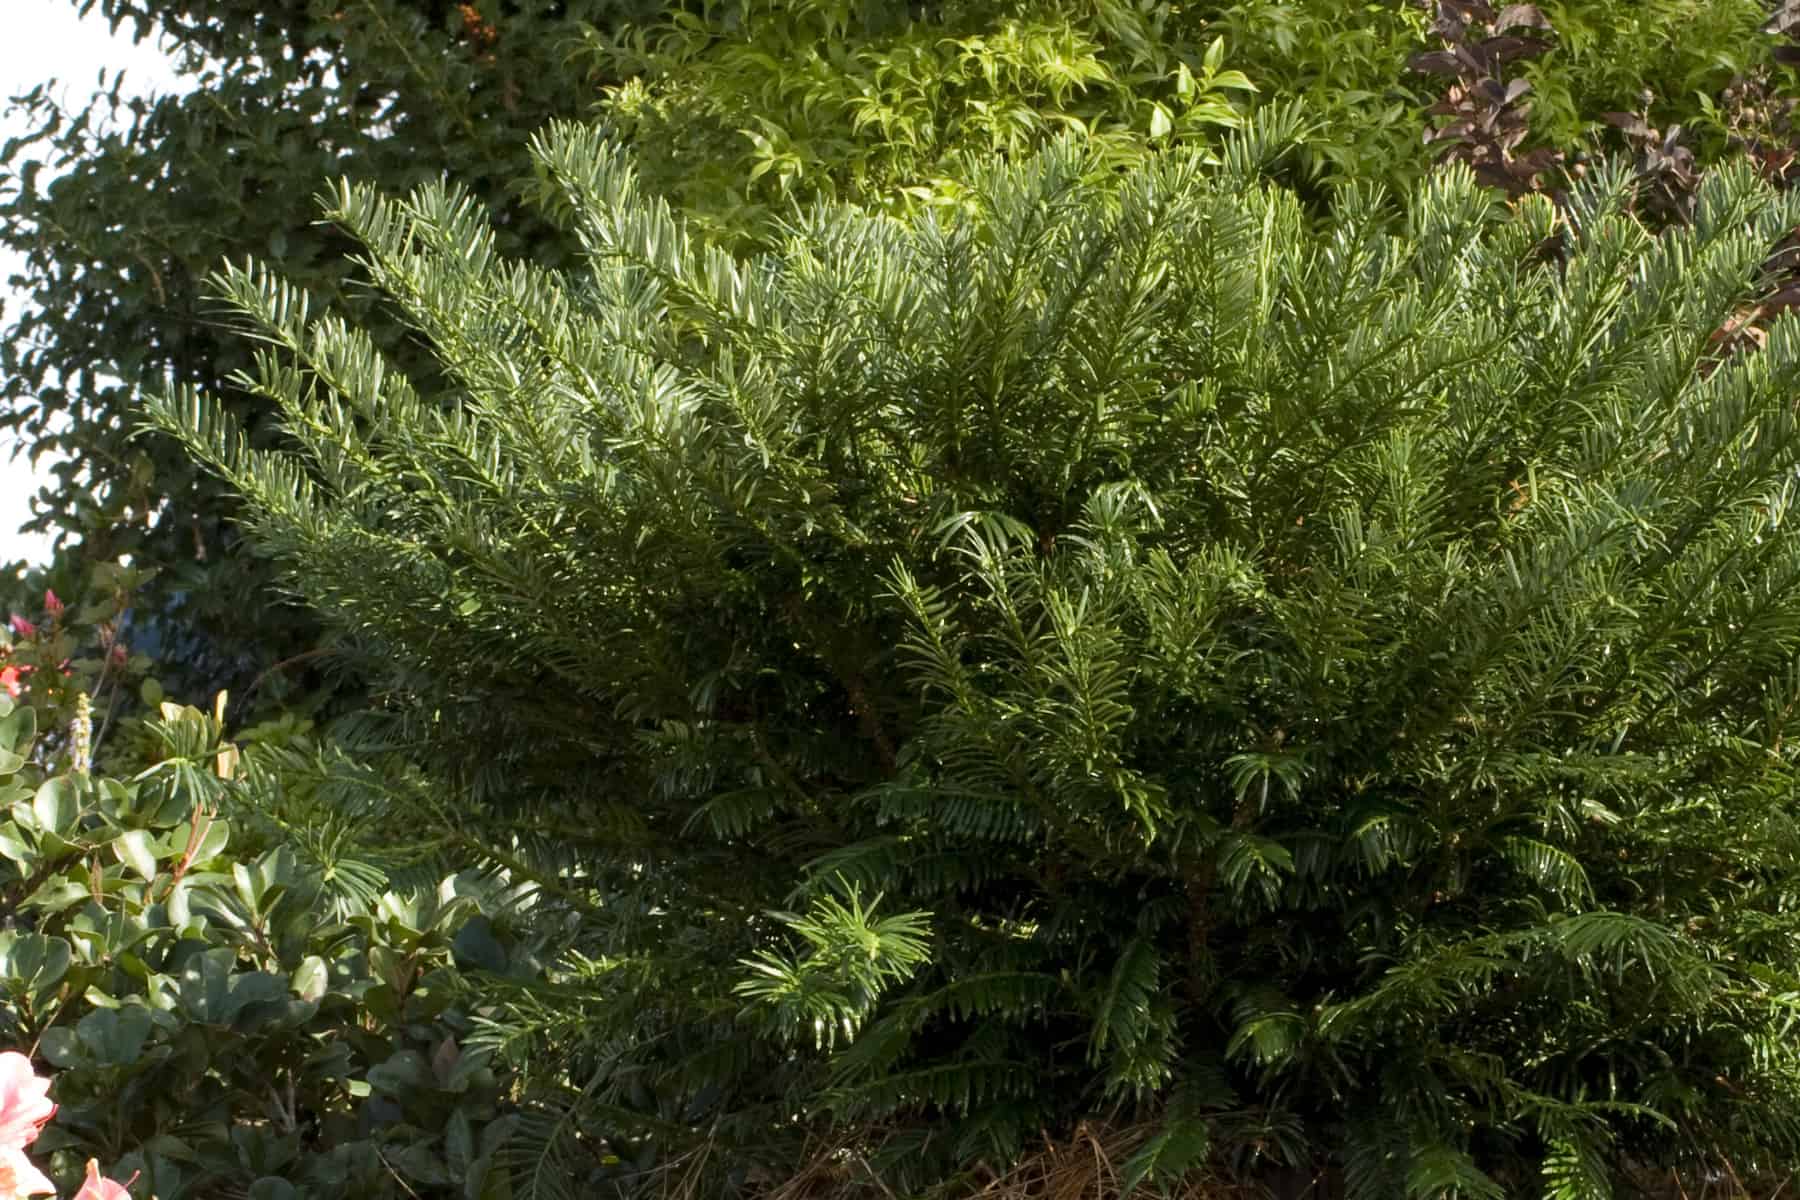 Heat tolerant, drought resistant, and shade loving plum yew